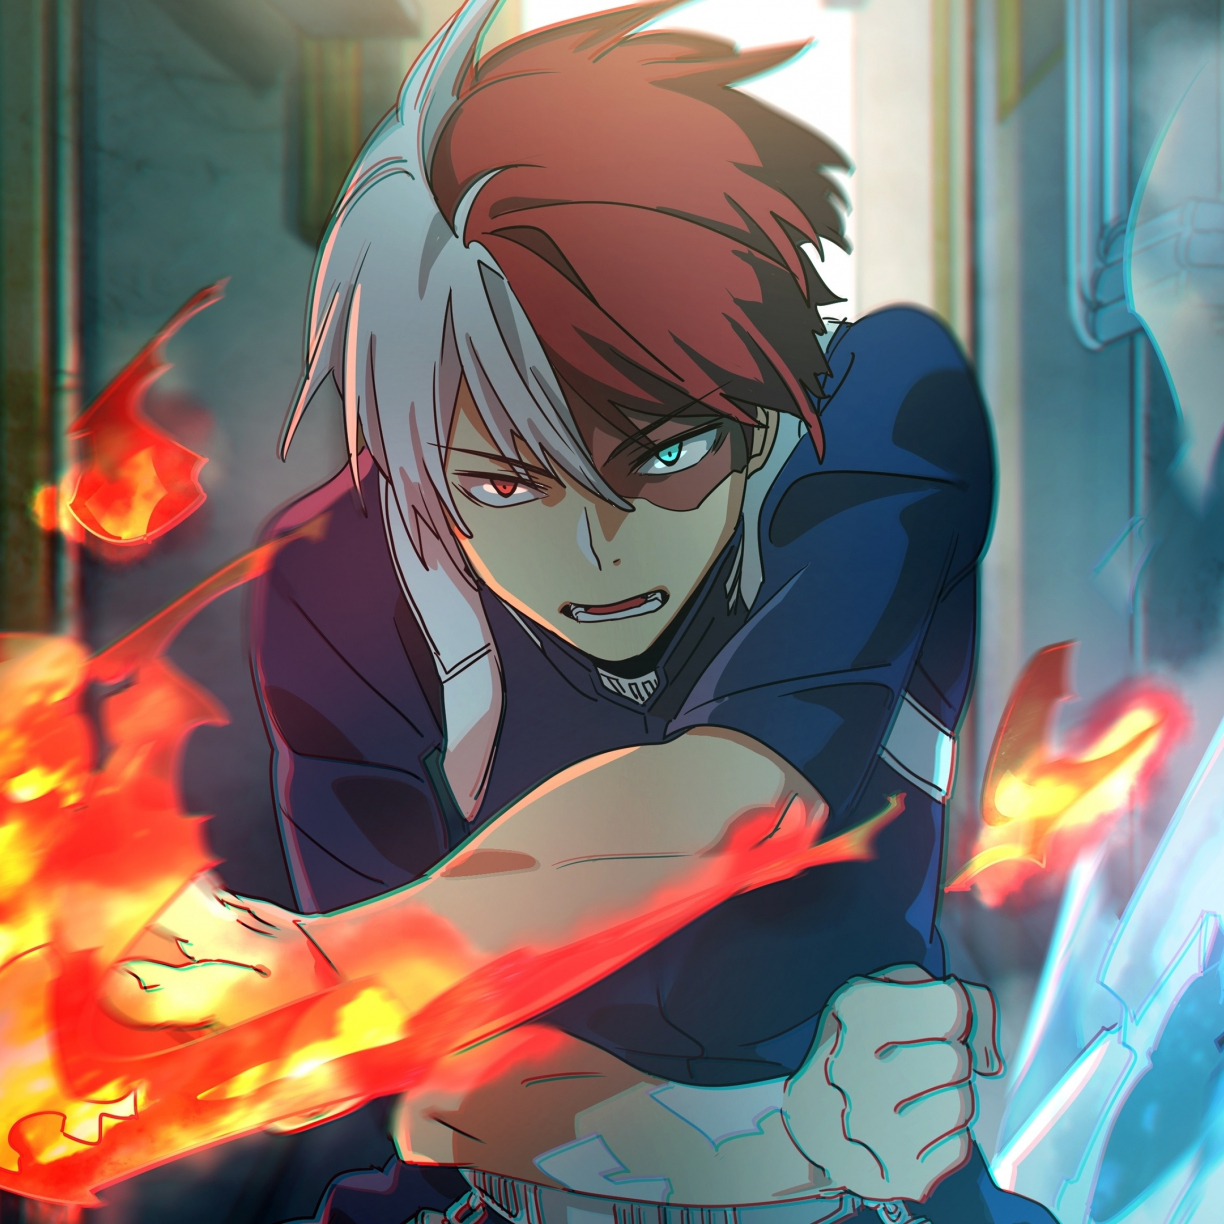 Shouto todoroki, angry, my hero academia, anime boy wallpaper, HD image, picture, background, 5d5c10